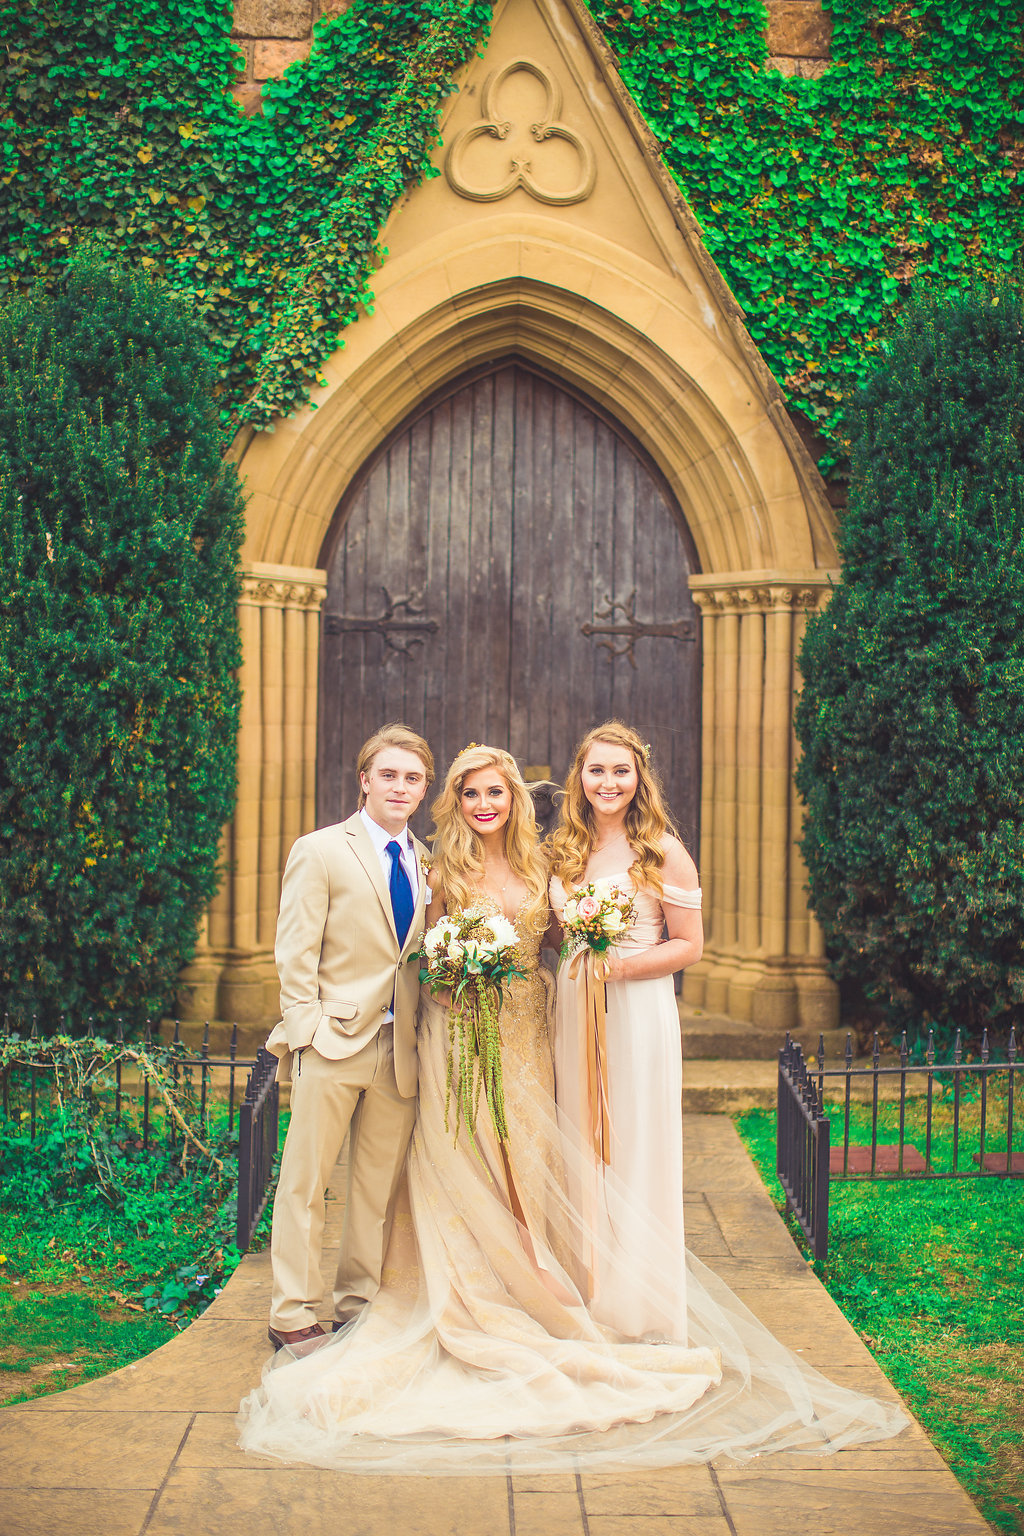 Wedding Photograph Of Bride and Siblings in Suit and Dress Los Angeles